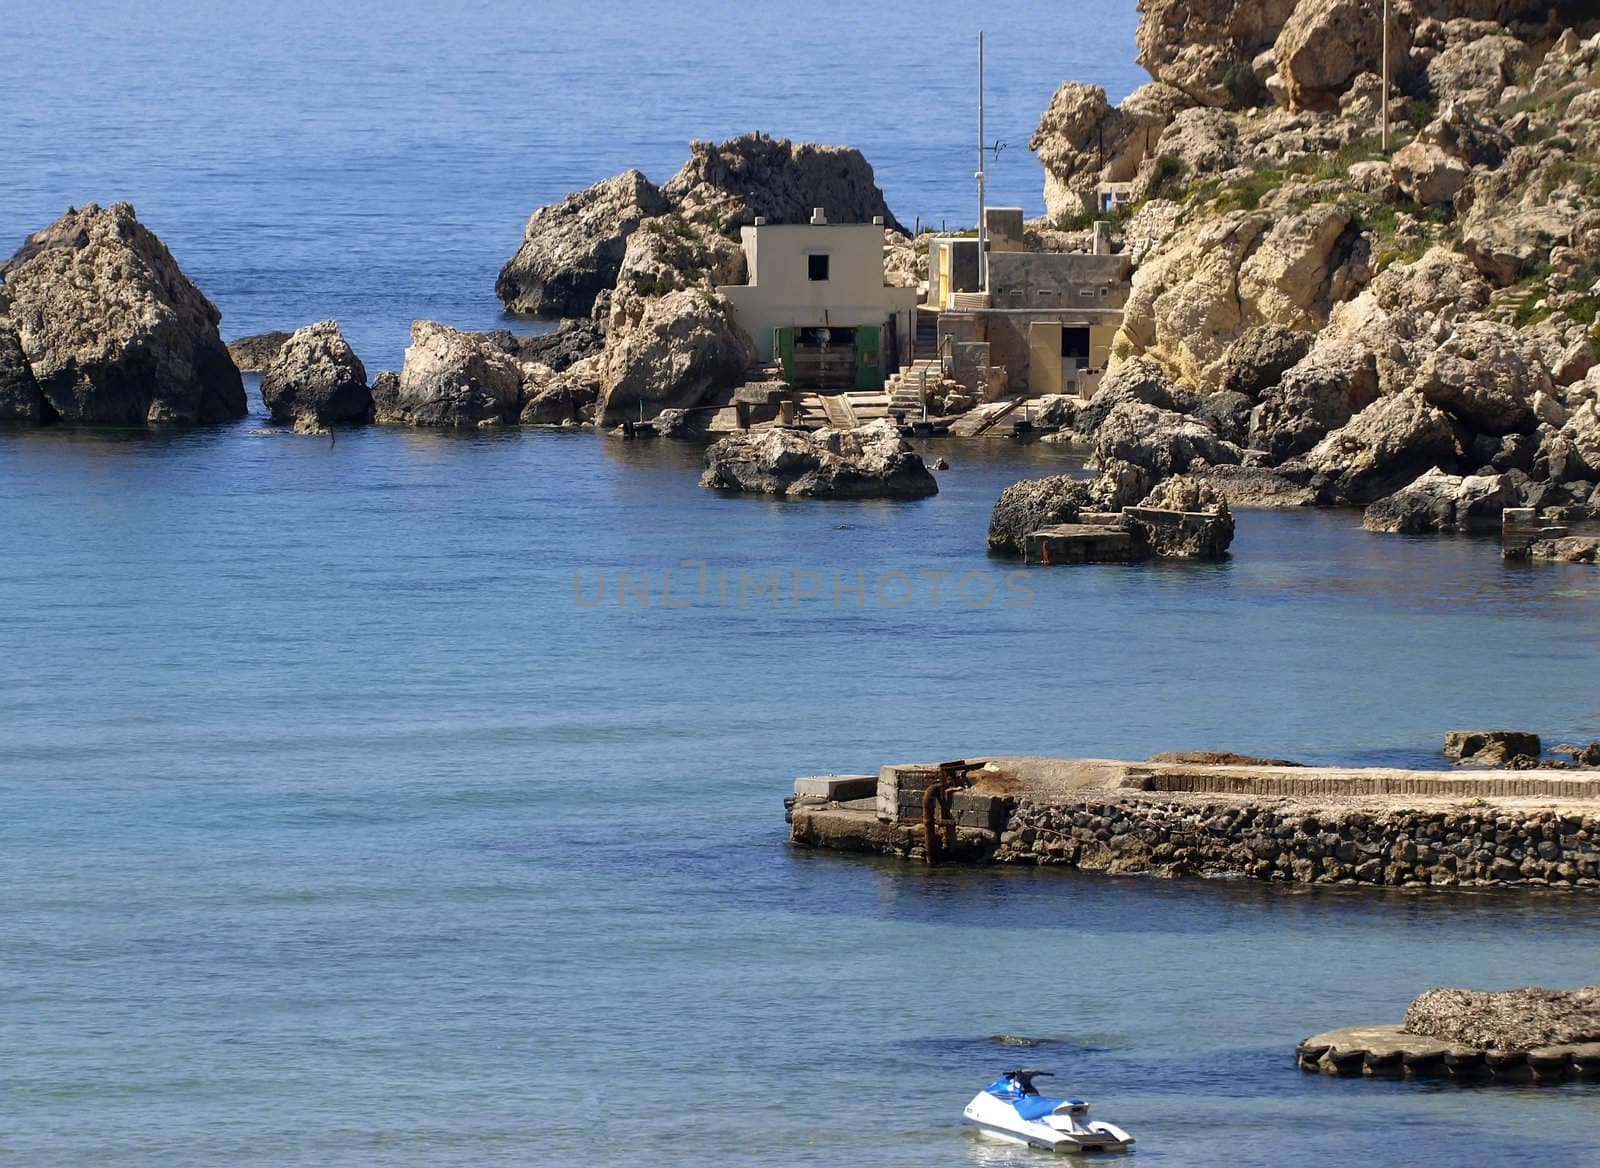 Typical fisherman's cabin by the sea on the coast in Malta.